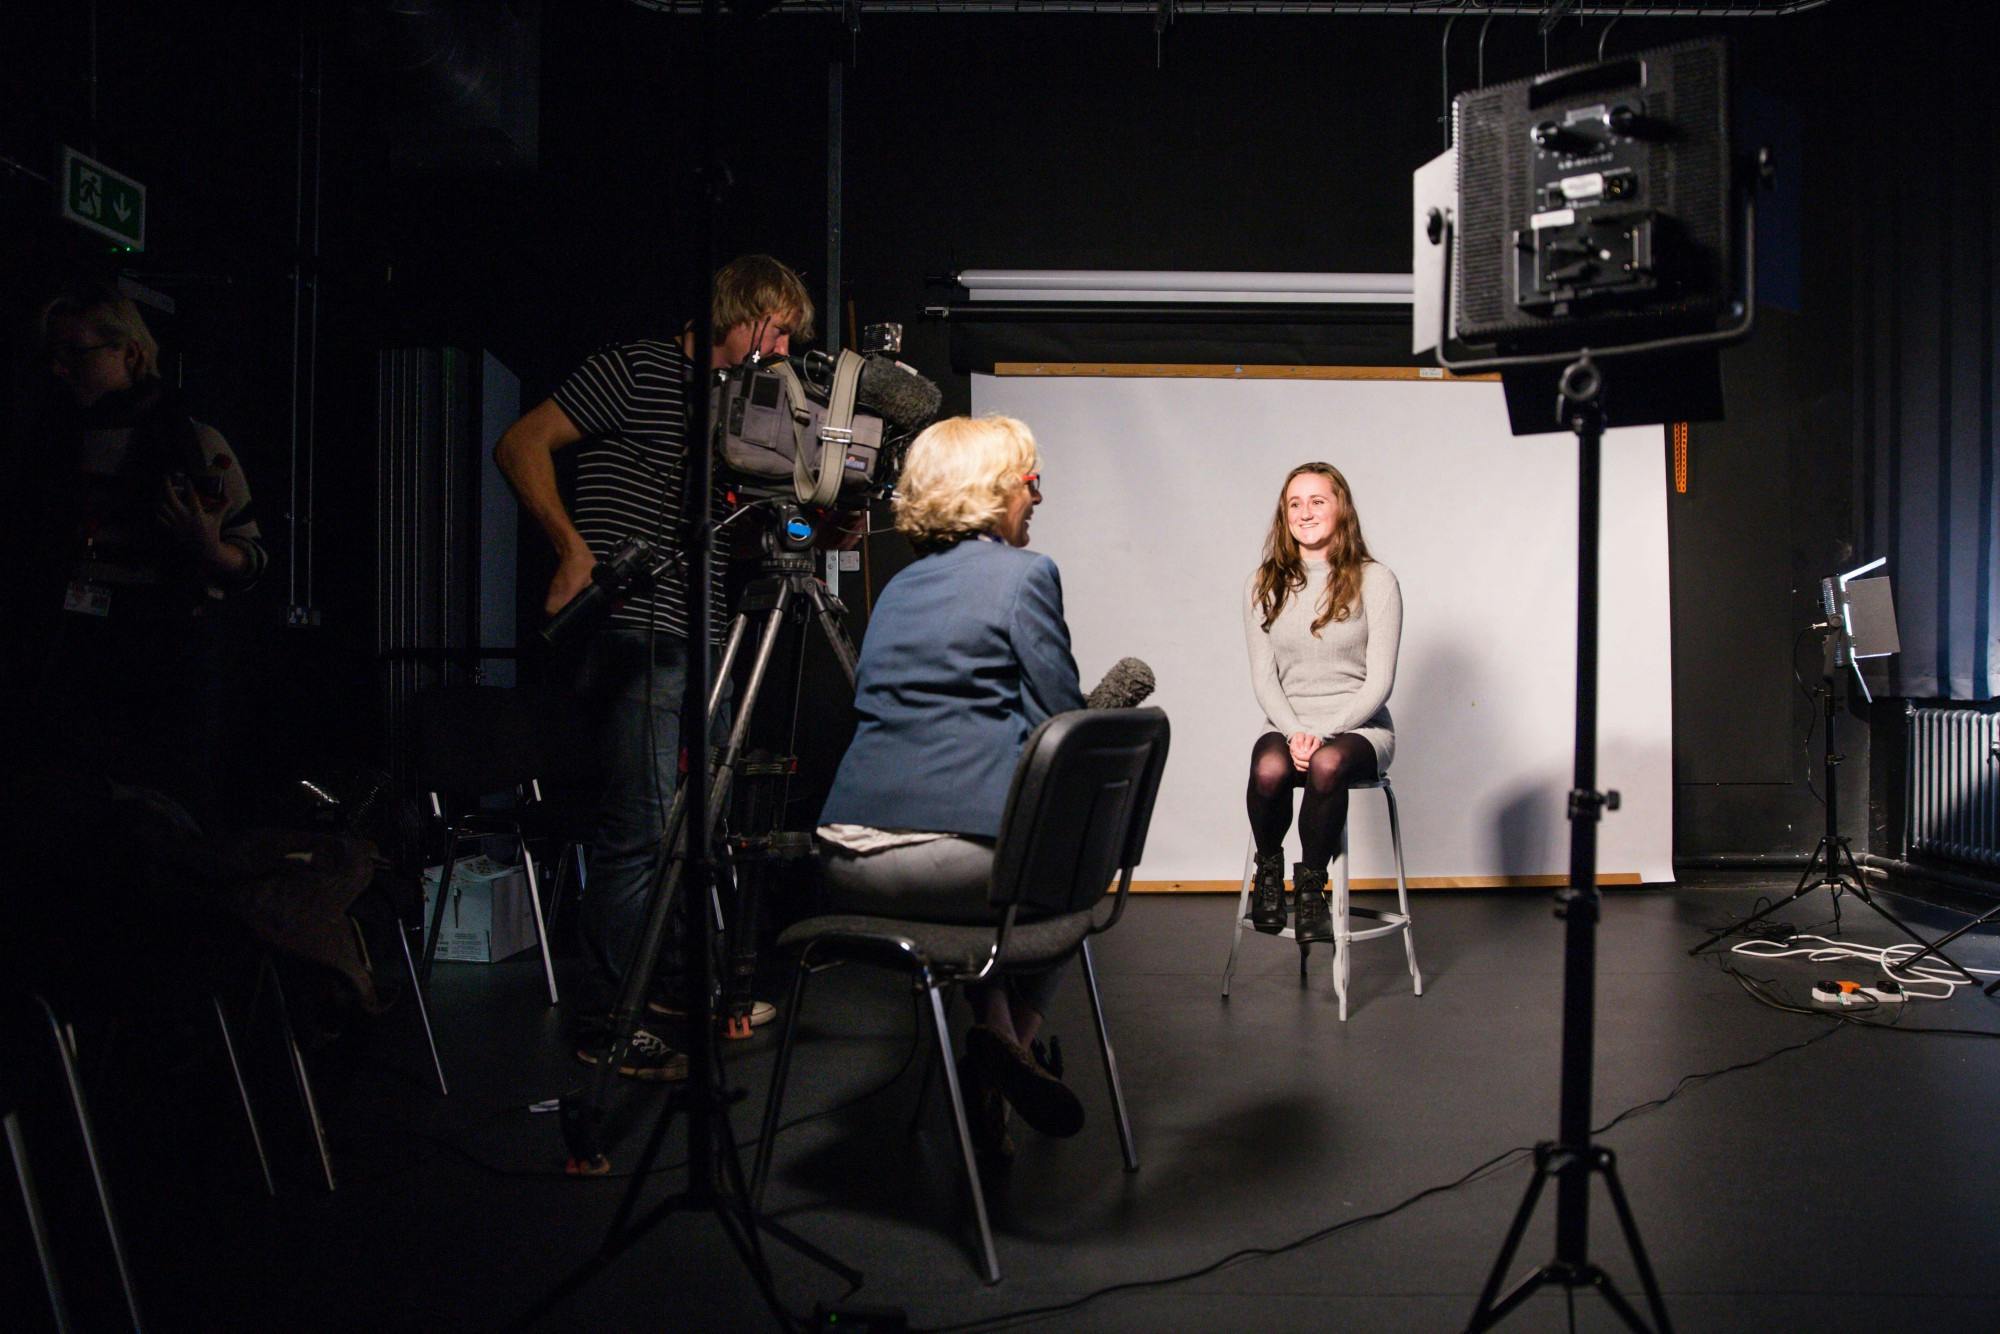 BBC Spotlight interviews student Ceri Louise Prowse during the first year of the BFI Film Academy